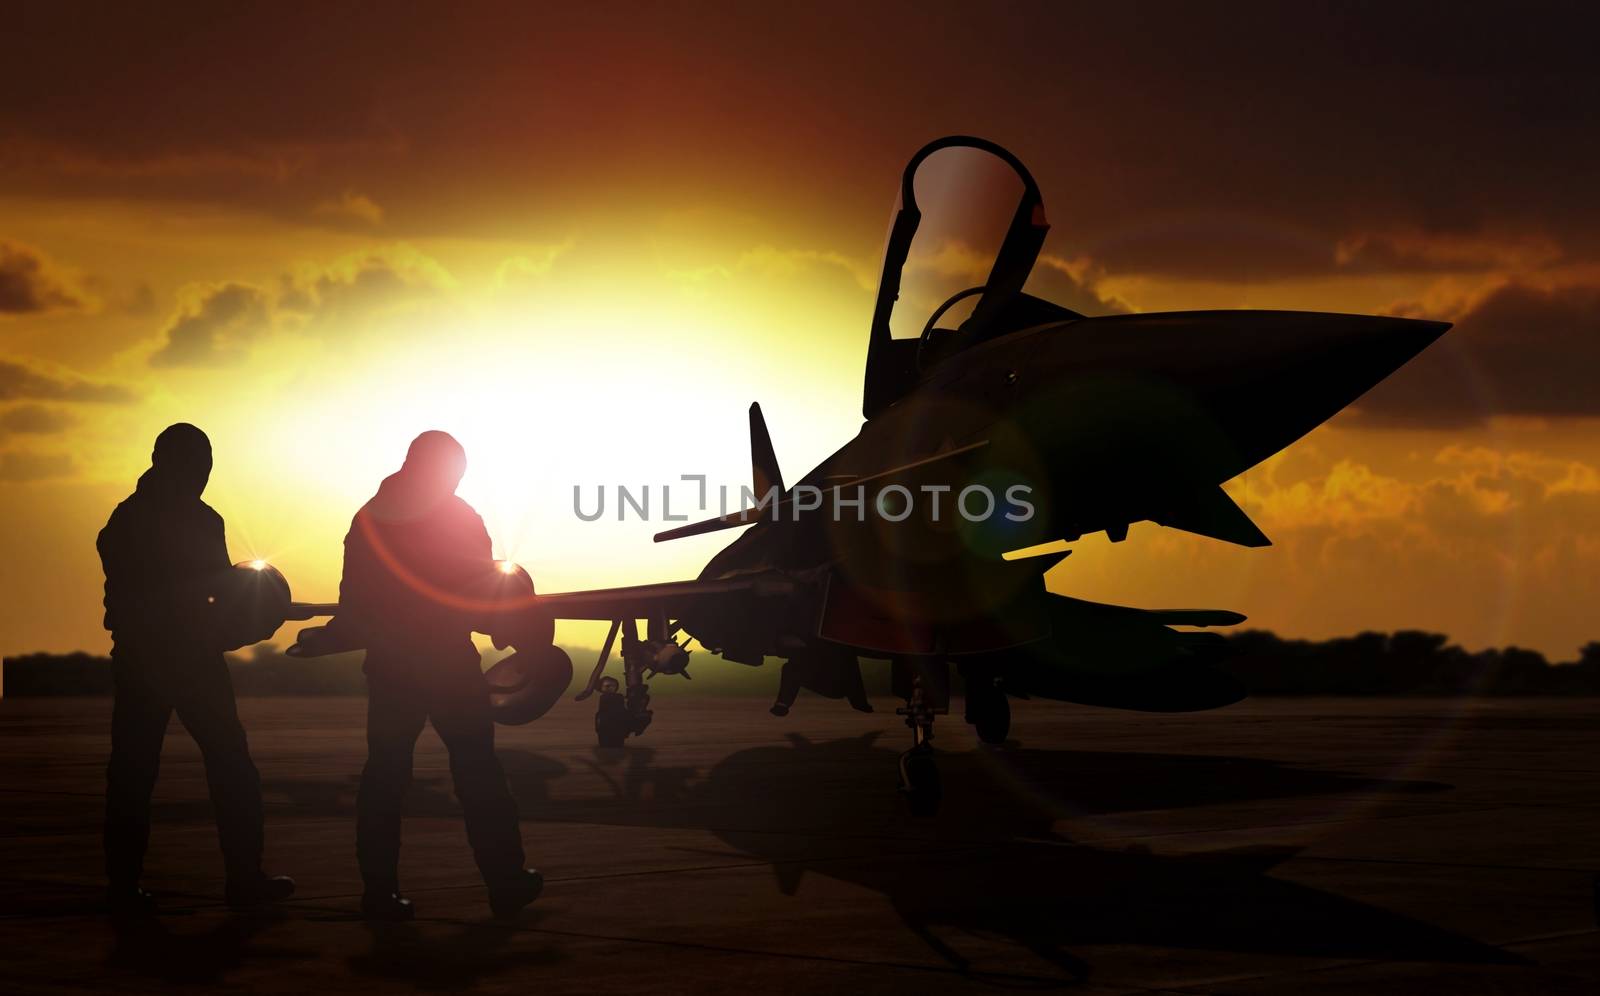 military aircraft on airfield with pilot walking towards the aircraft by razihusin